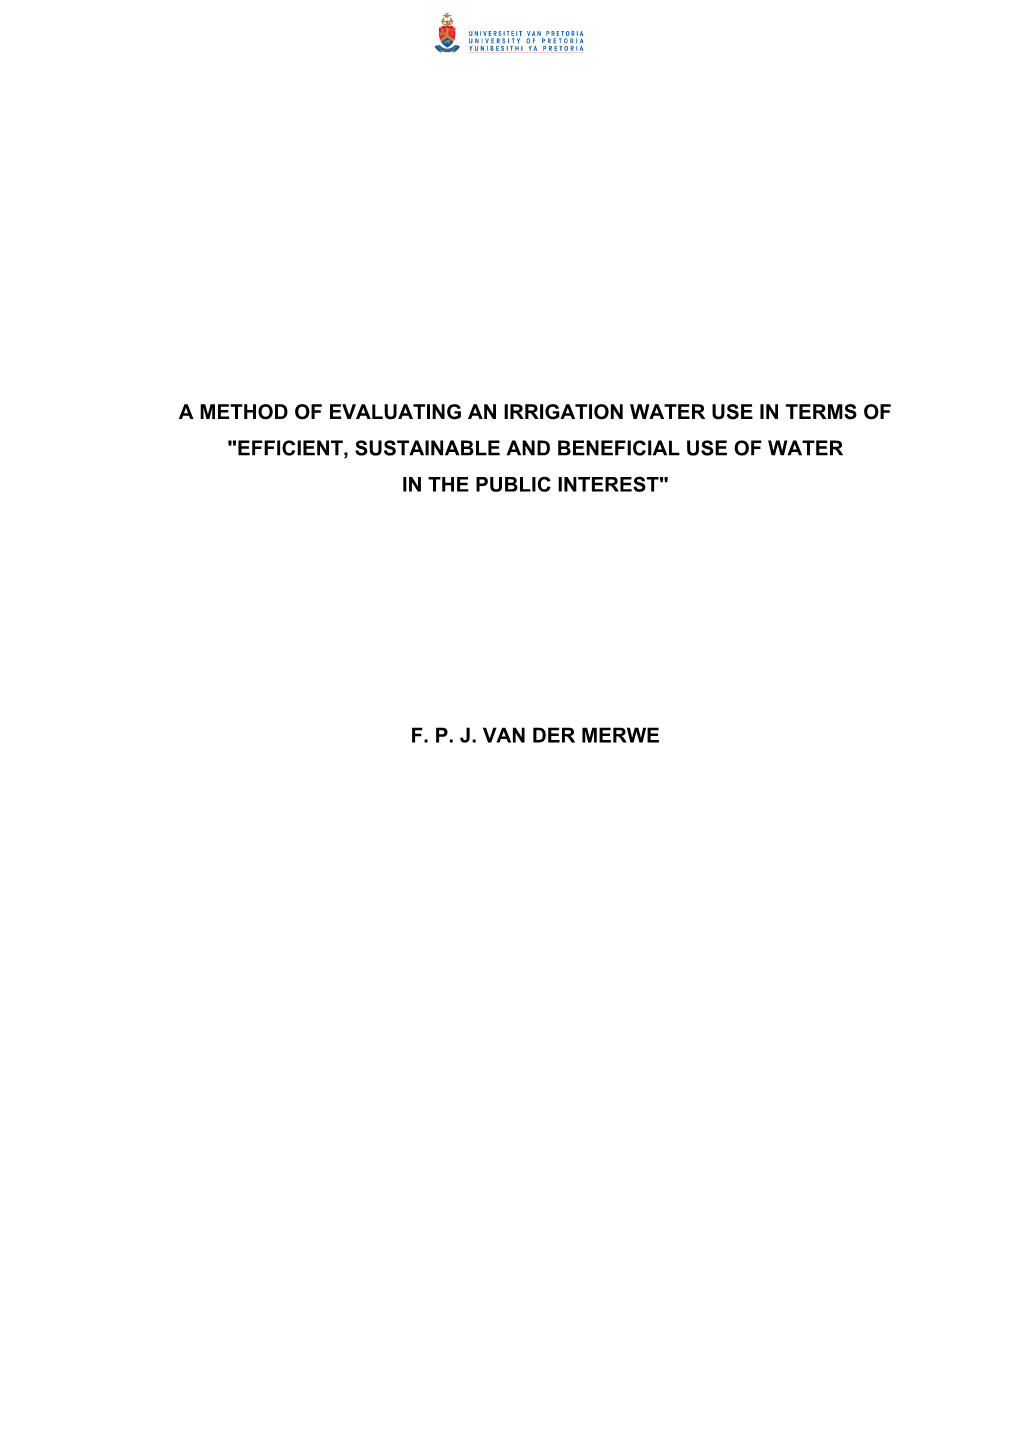 A Method of Evaluating an Irrigation Water Use in Terms of "Efficient, Sustainable and Beneficial Use of Water in the Public Interest"